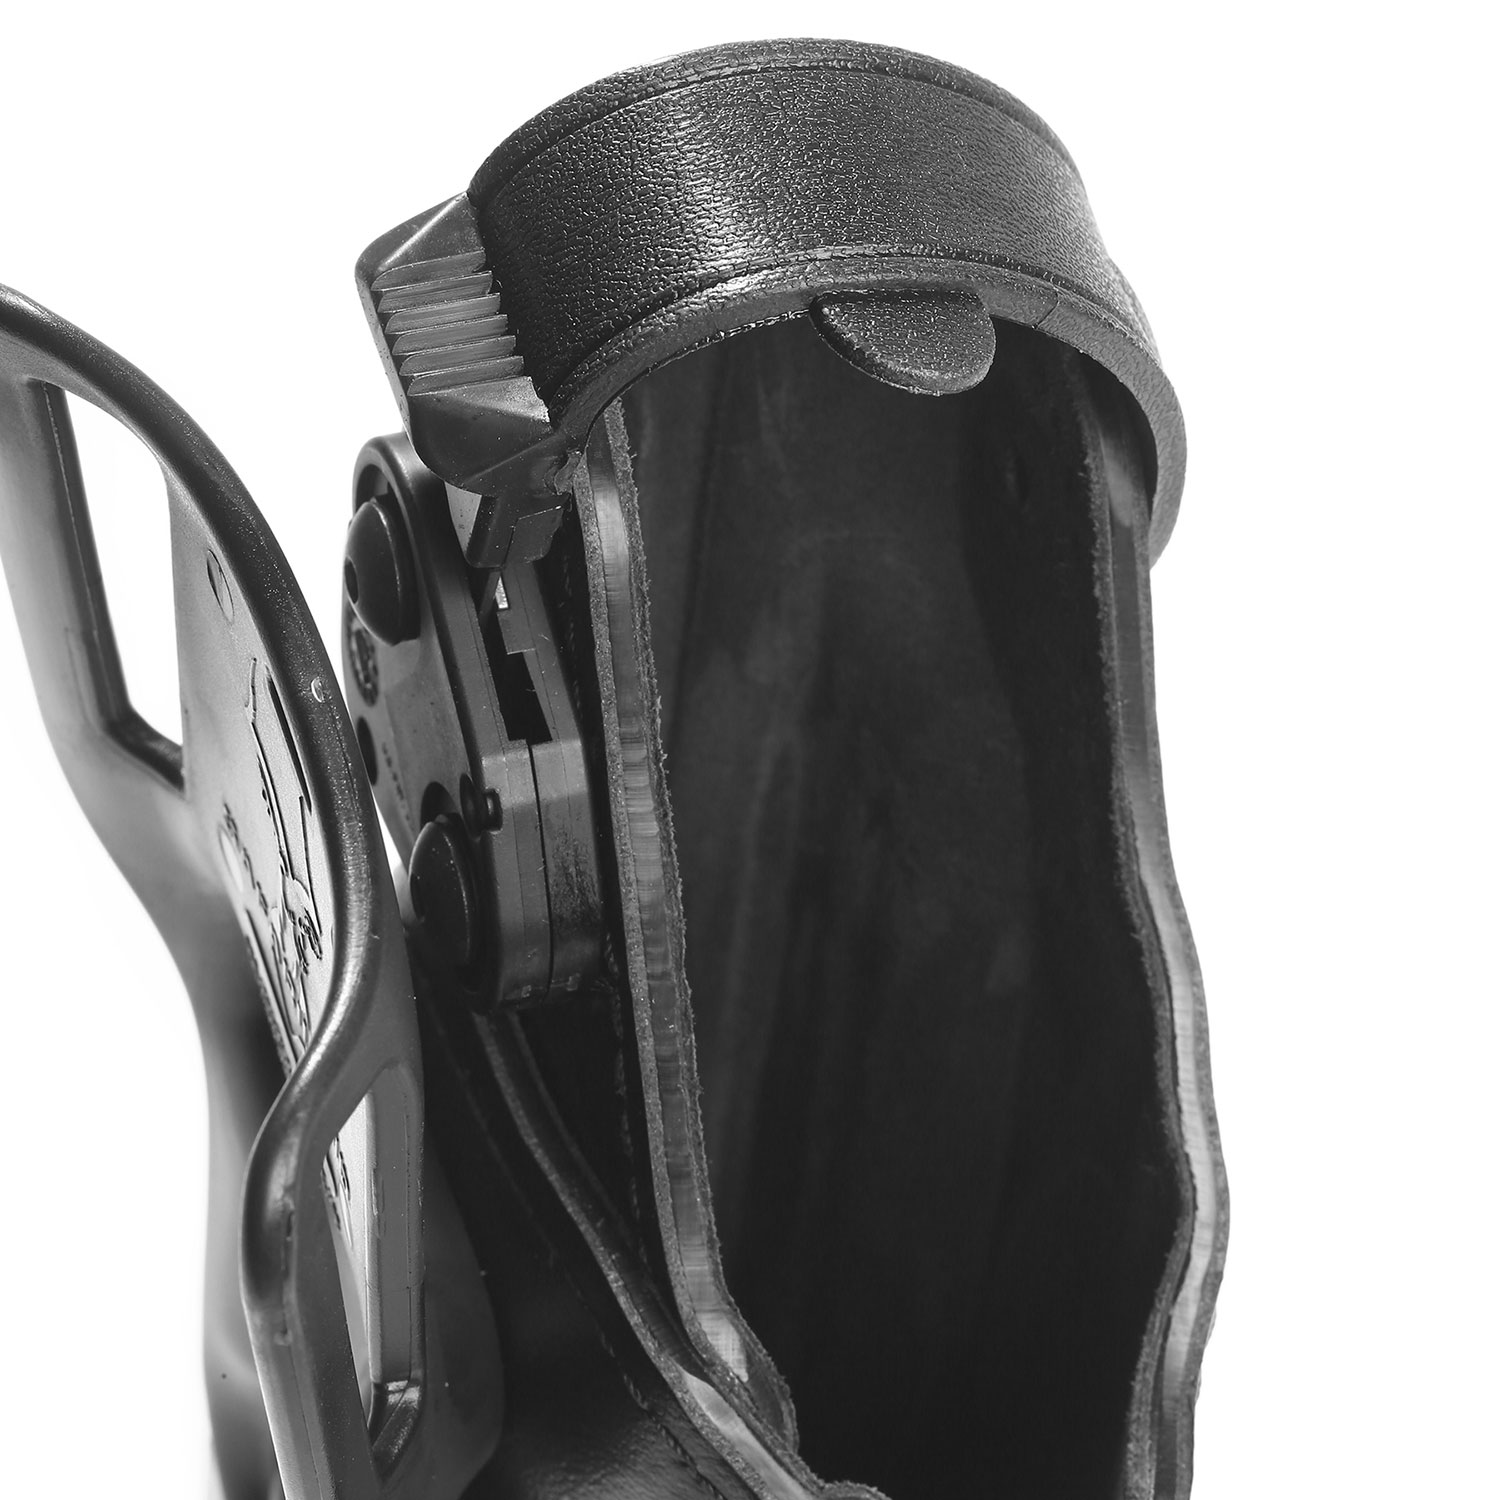 Safariland 6280 Holster for Gun with Light